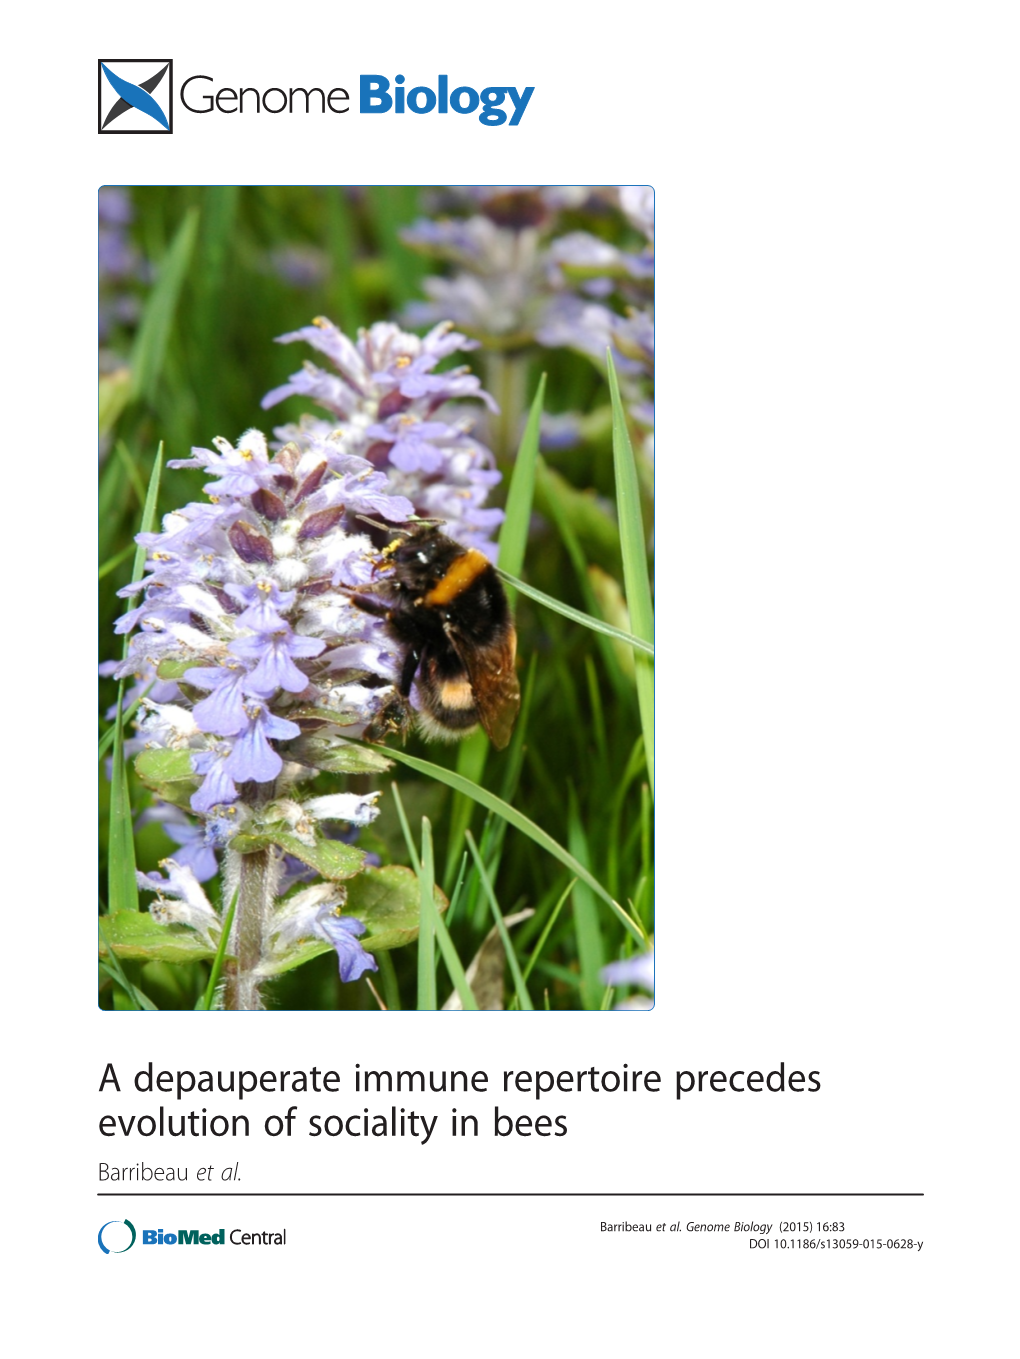 A Depauperate Immune Repertoire Precedes Evolution of Sociality in Bees Barribeau Et Al